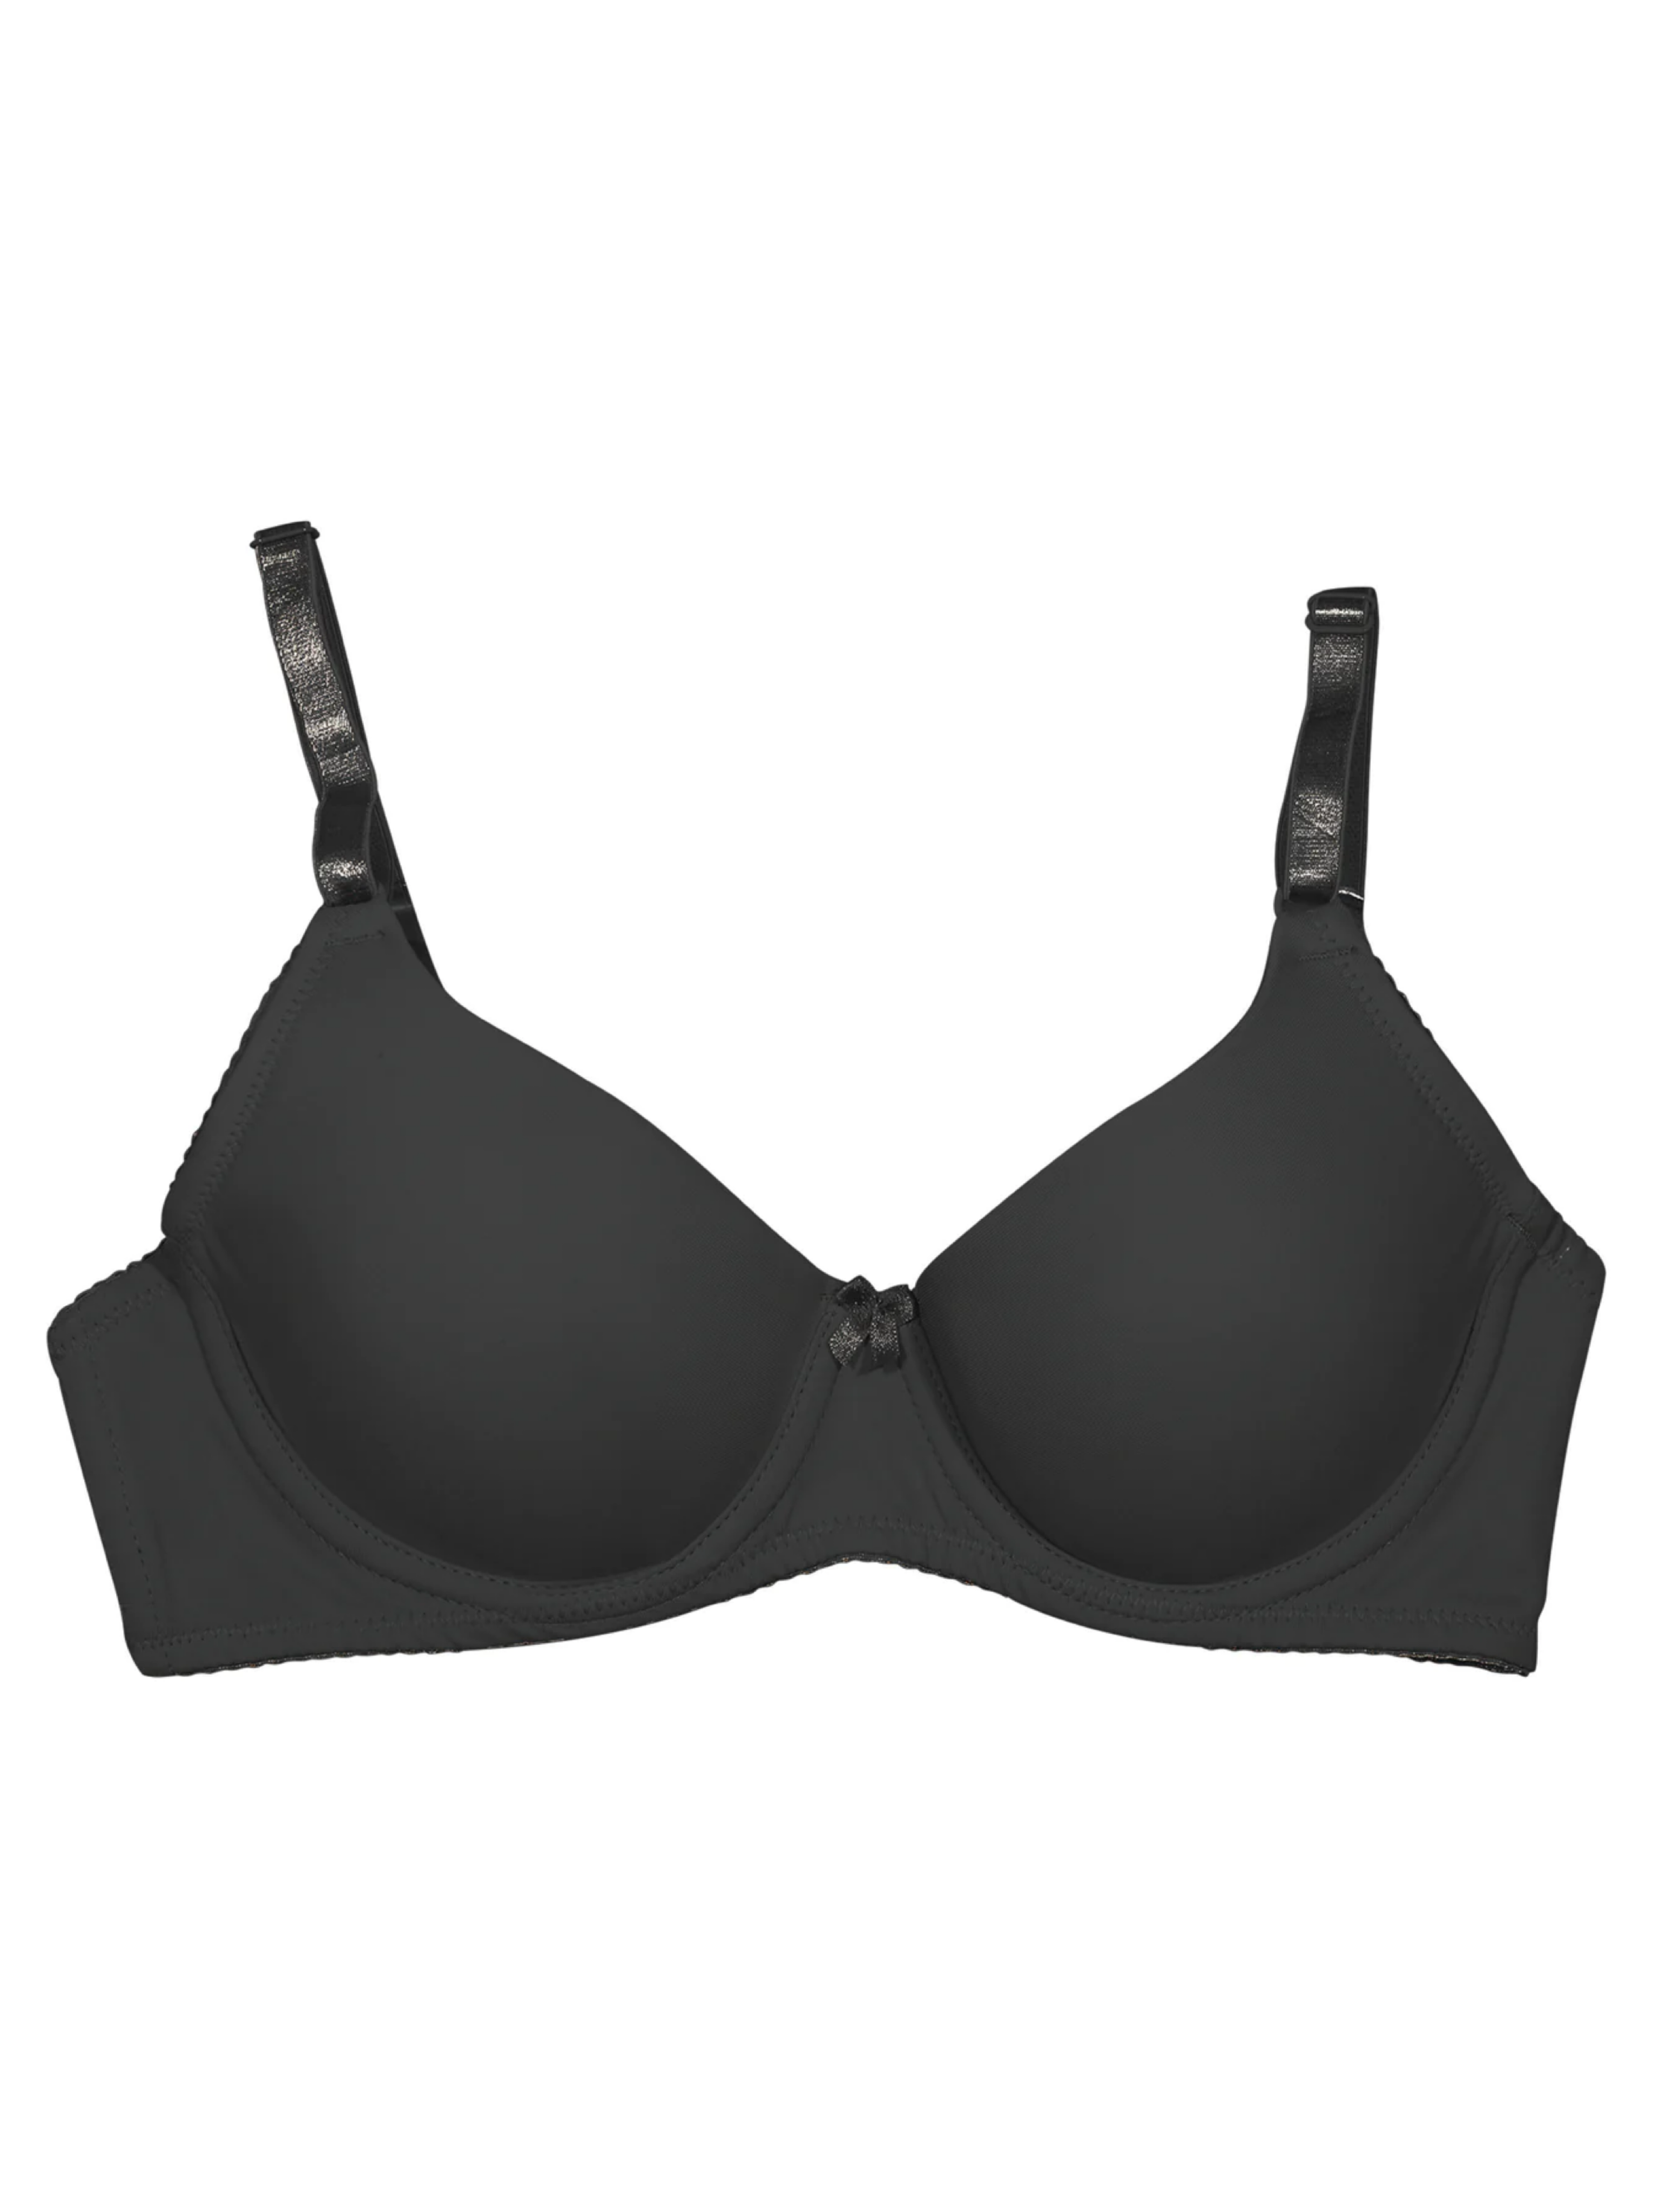 Buy Quttos New Definition Of Freedom Stick on Pushup Bra - Black online